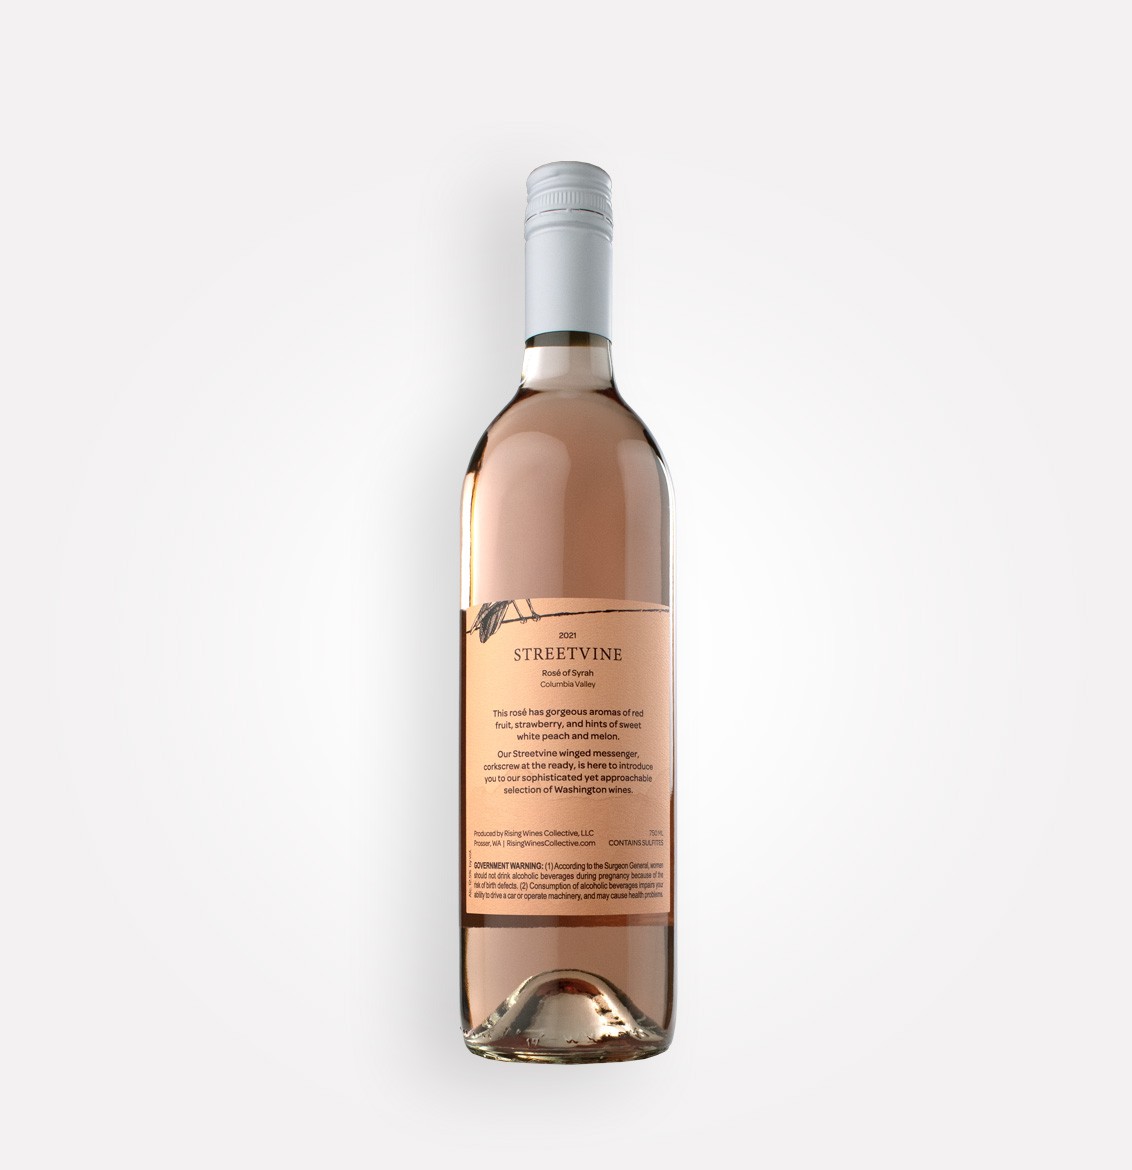 Back bottle view of Streetvine 2021 Rosé of Syrah wine from Washington's Columbia Valley